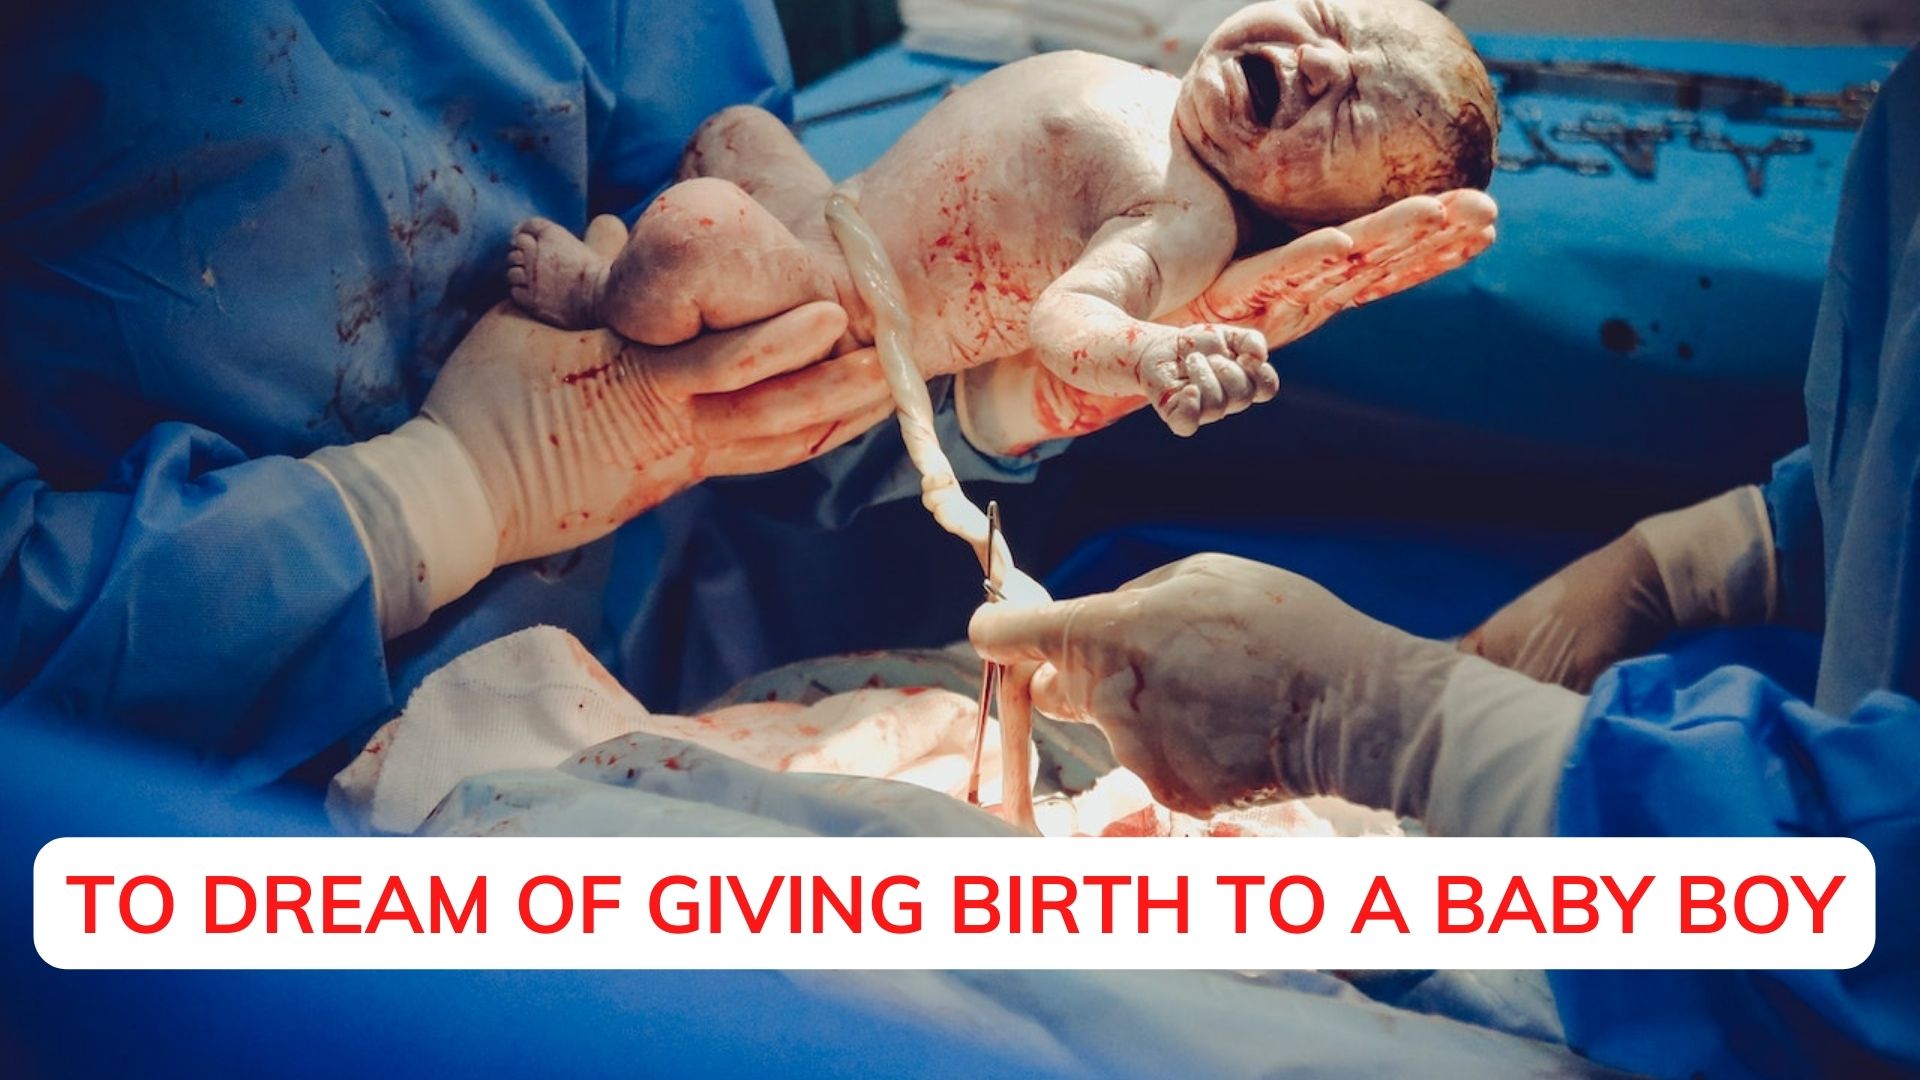 To Dream Of Giving Birth A Baby Boy - Symbolizes Reward For Hard Work